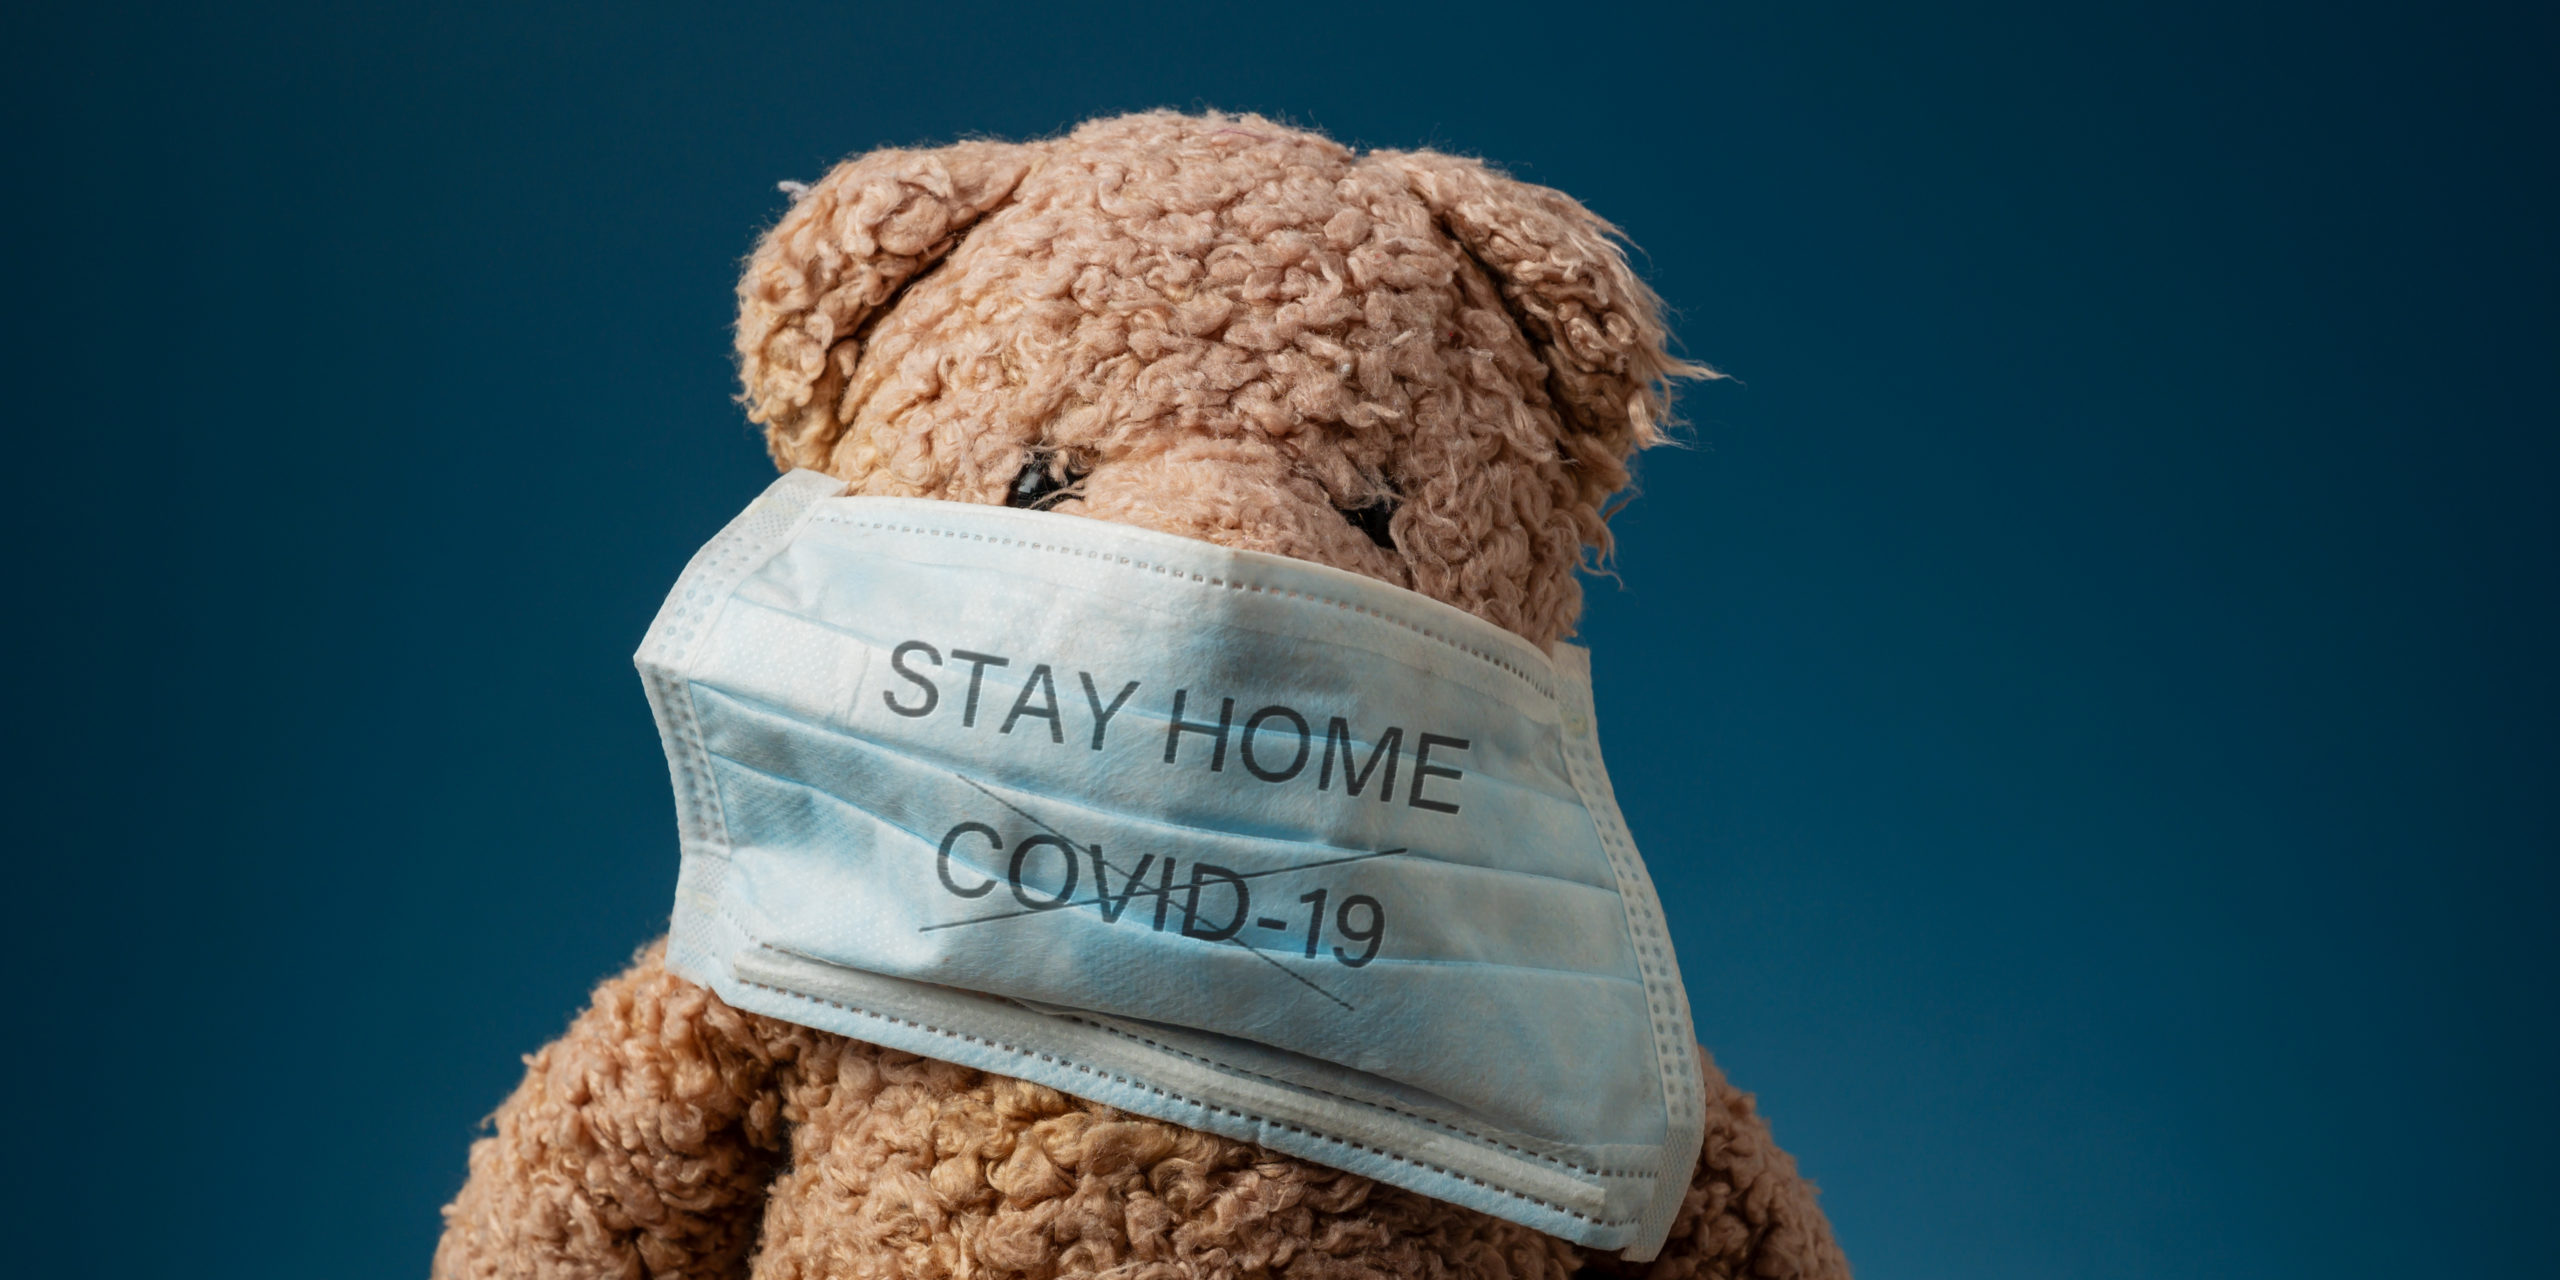 Teddy bear wearing protective medical mask with Stay Home sign and Covid 19 crossed.